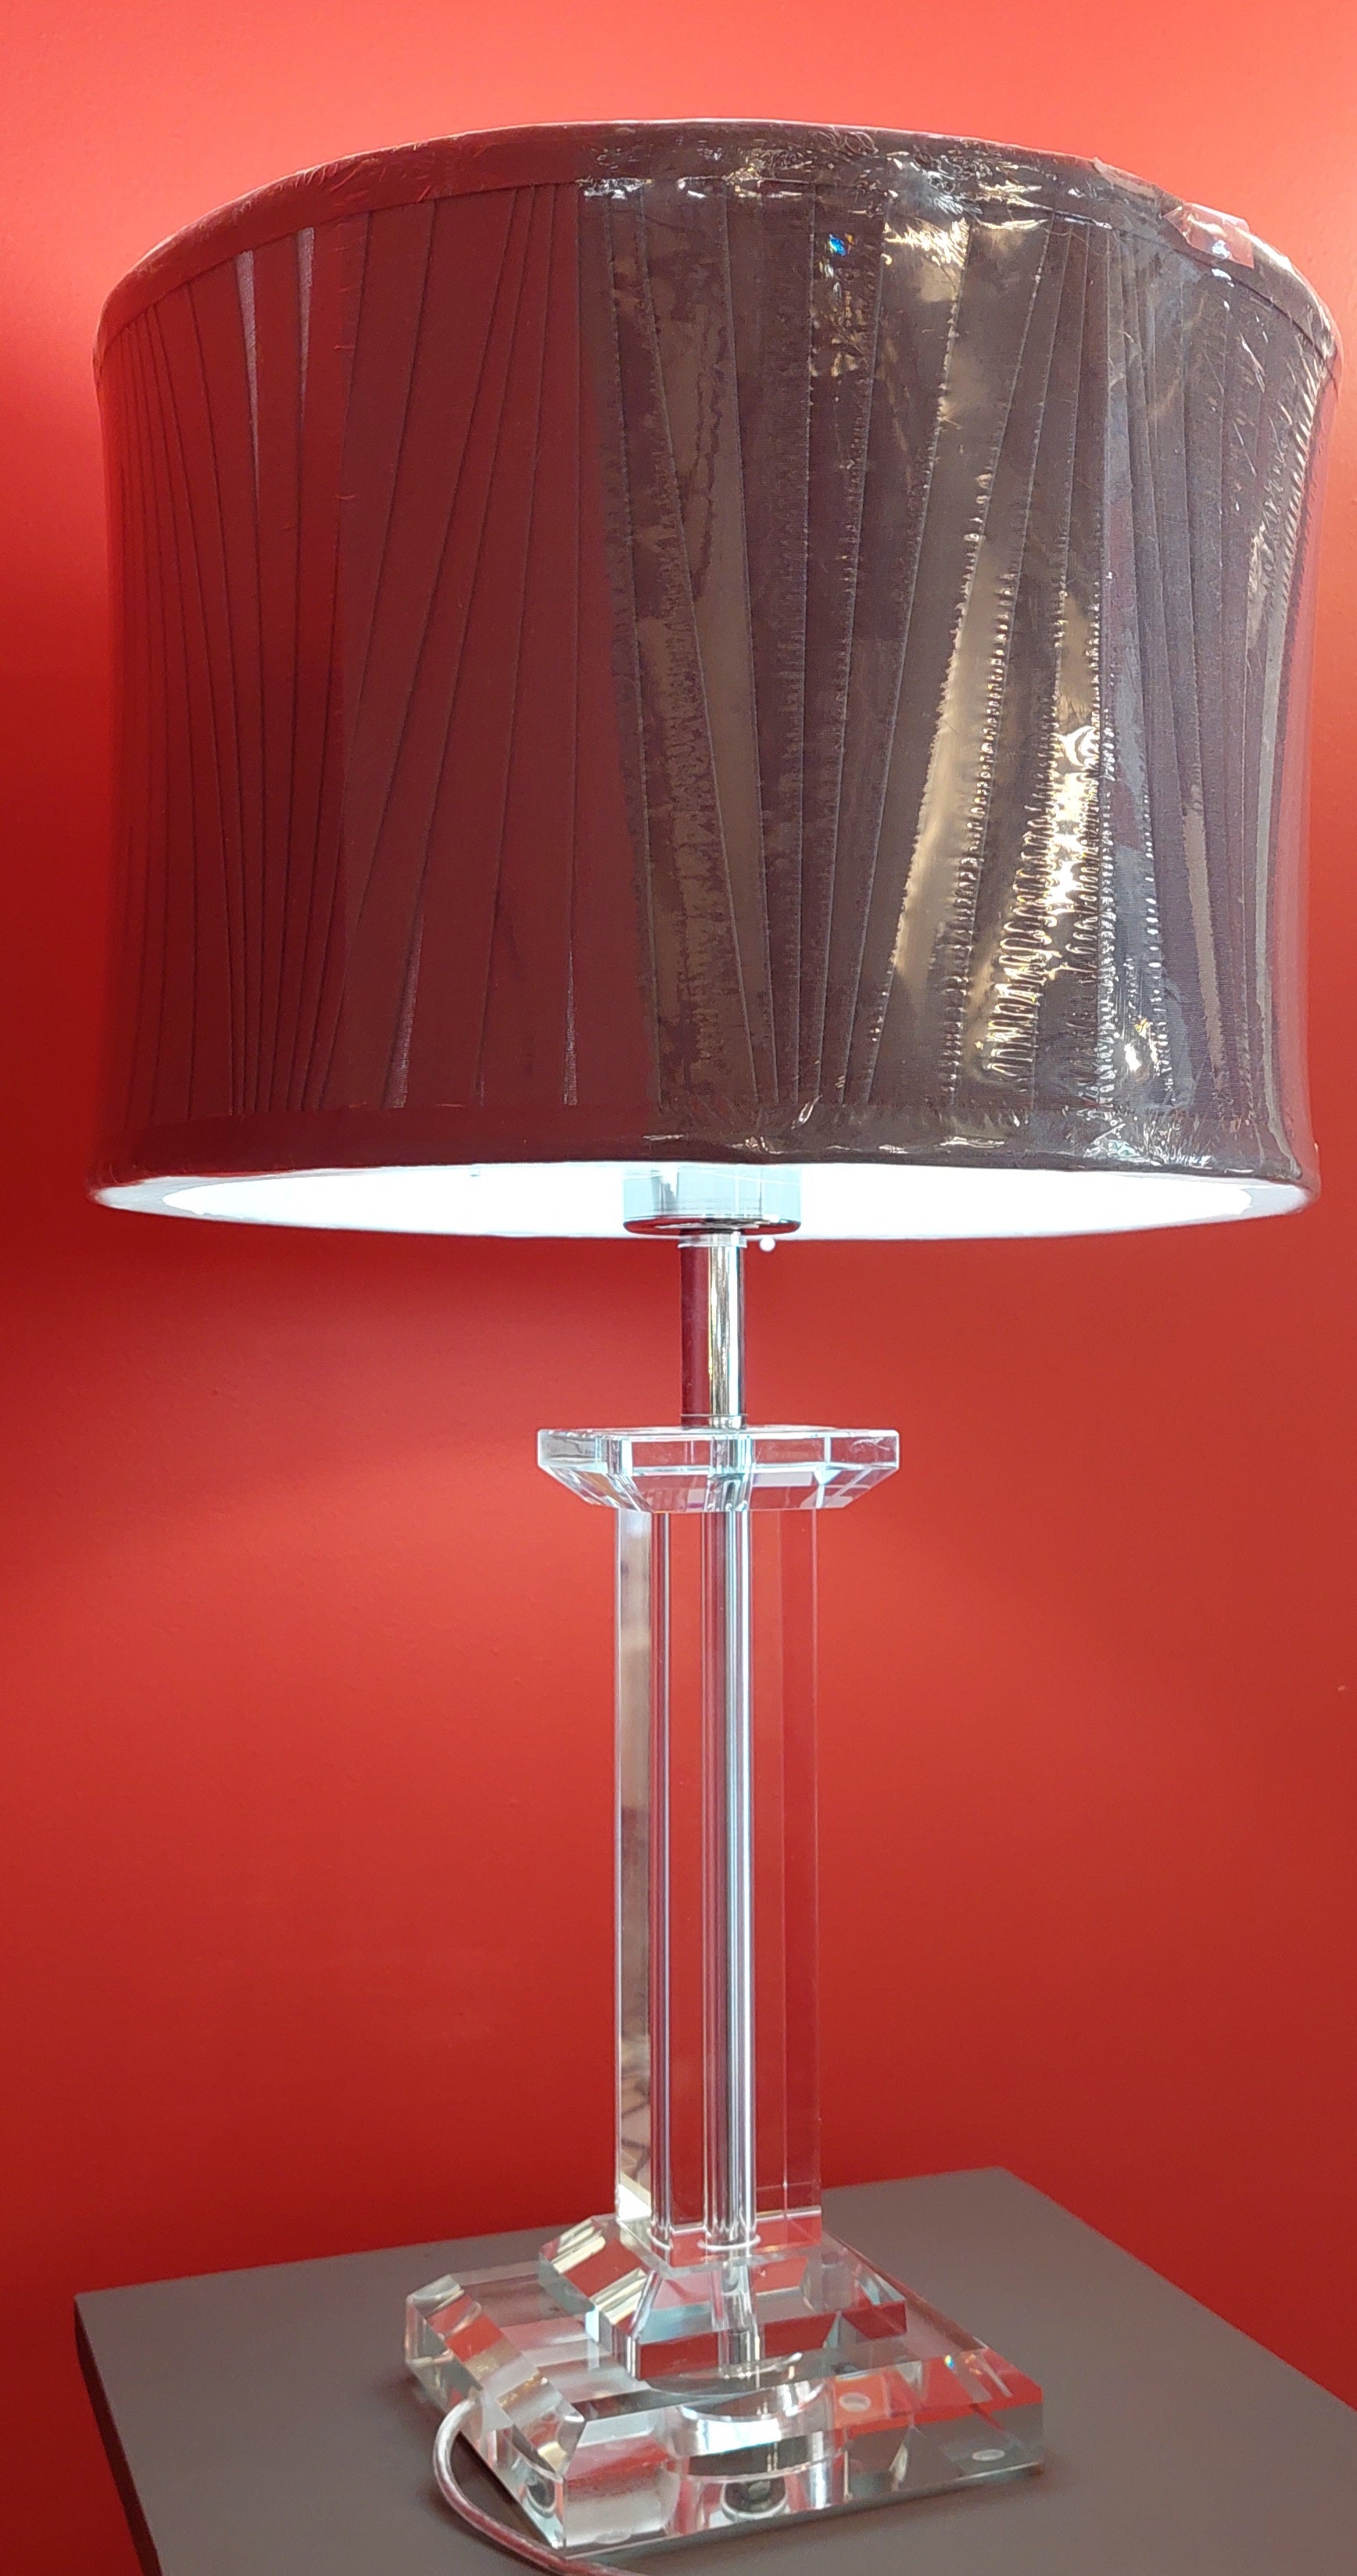 Albion Crystal Table Lamp Grey